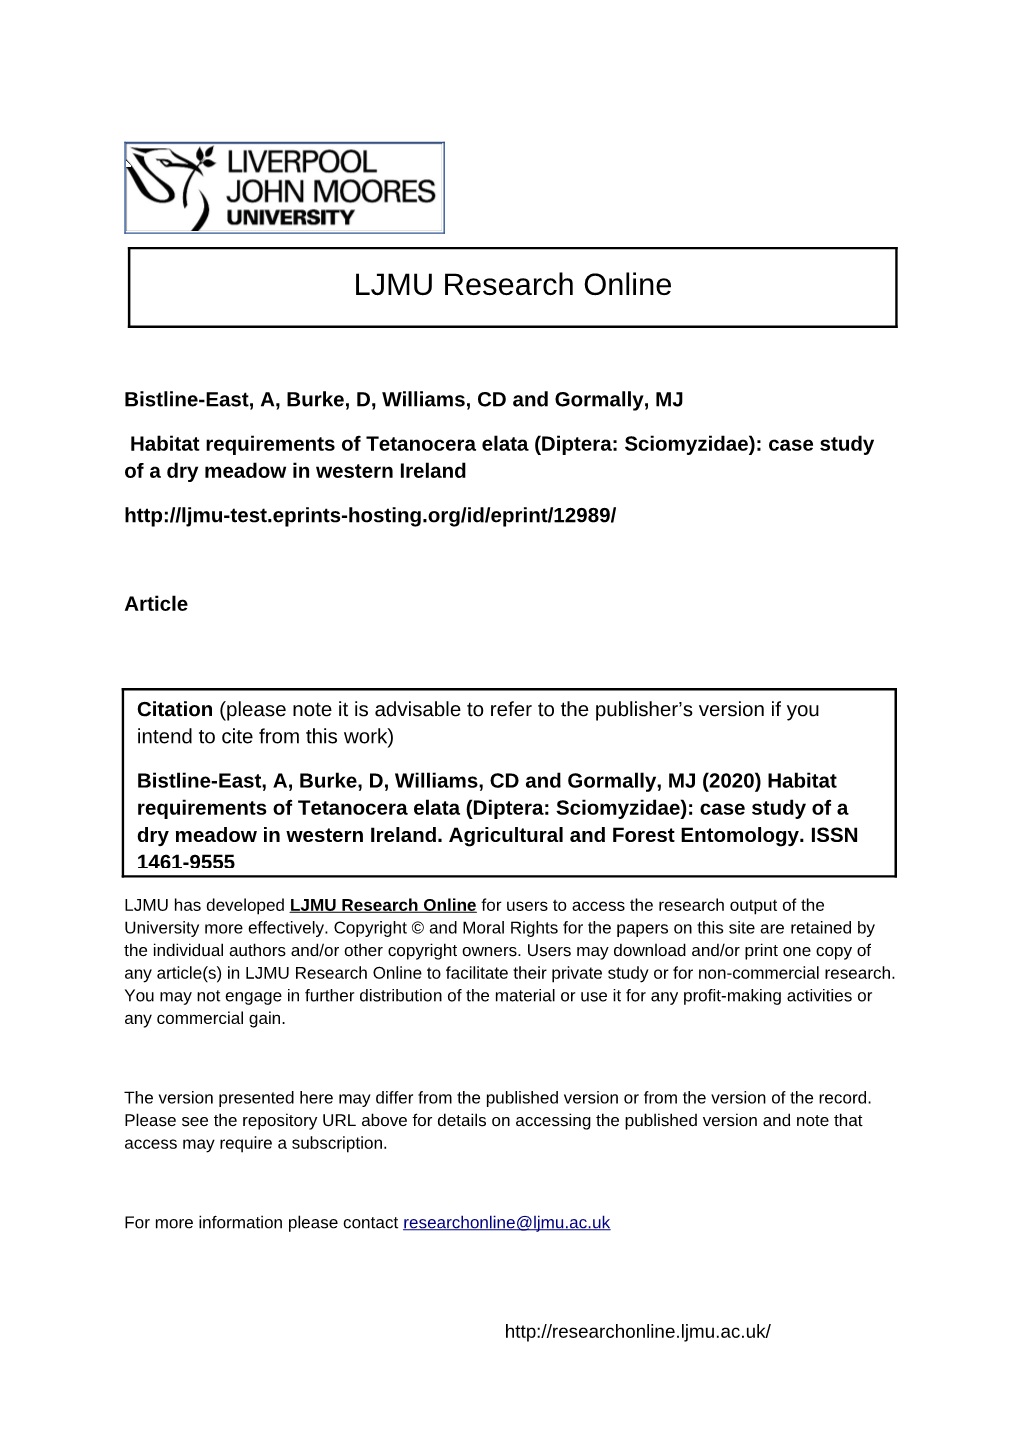 Download And/Or Print One Copy of Any Article(S) in LJMU Research Online to Facilitate Their Private Study Or for Non-Commercial Research